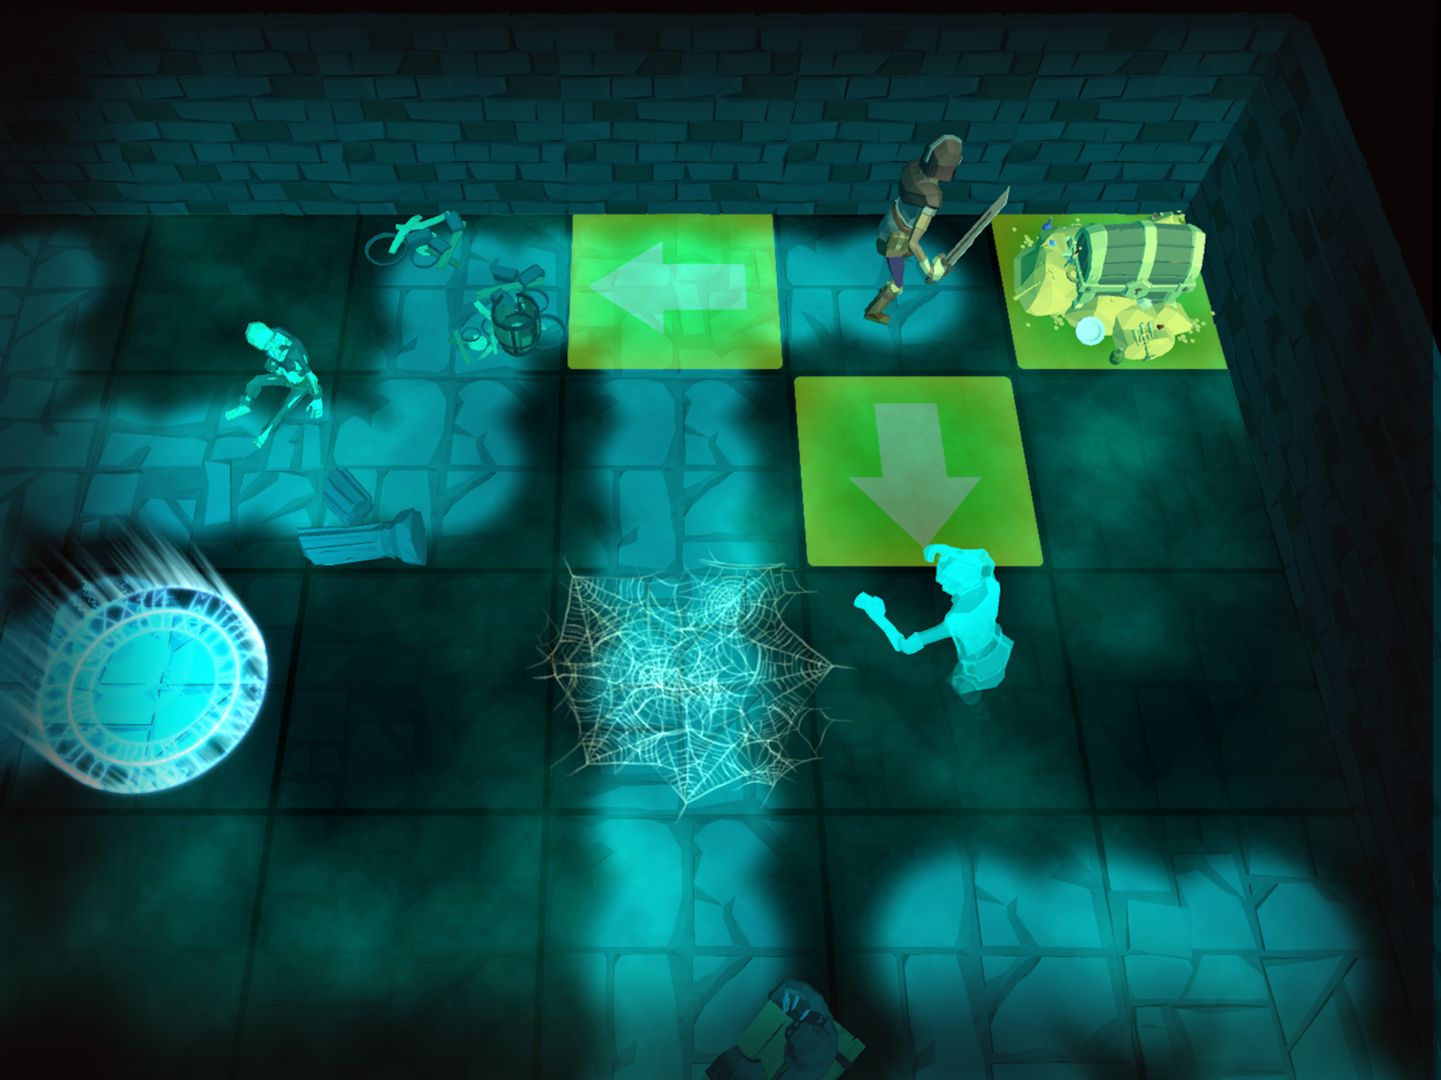 Screenshot of Into the Dungeon - Turn Based Tactical RPG Games